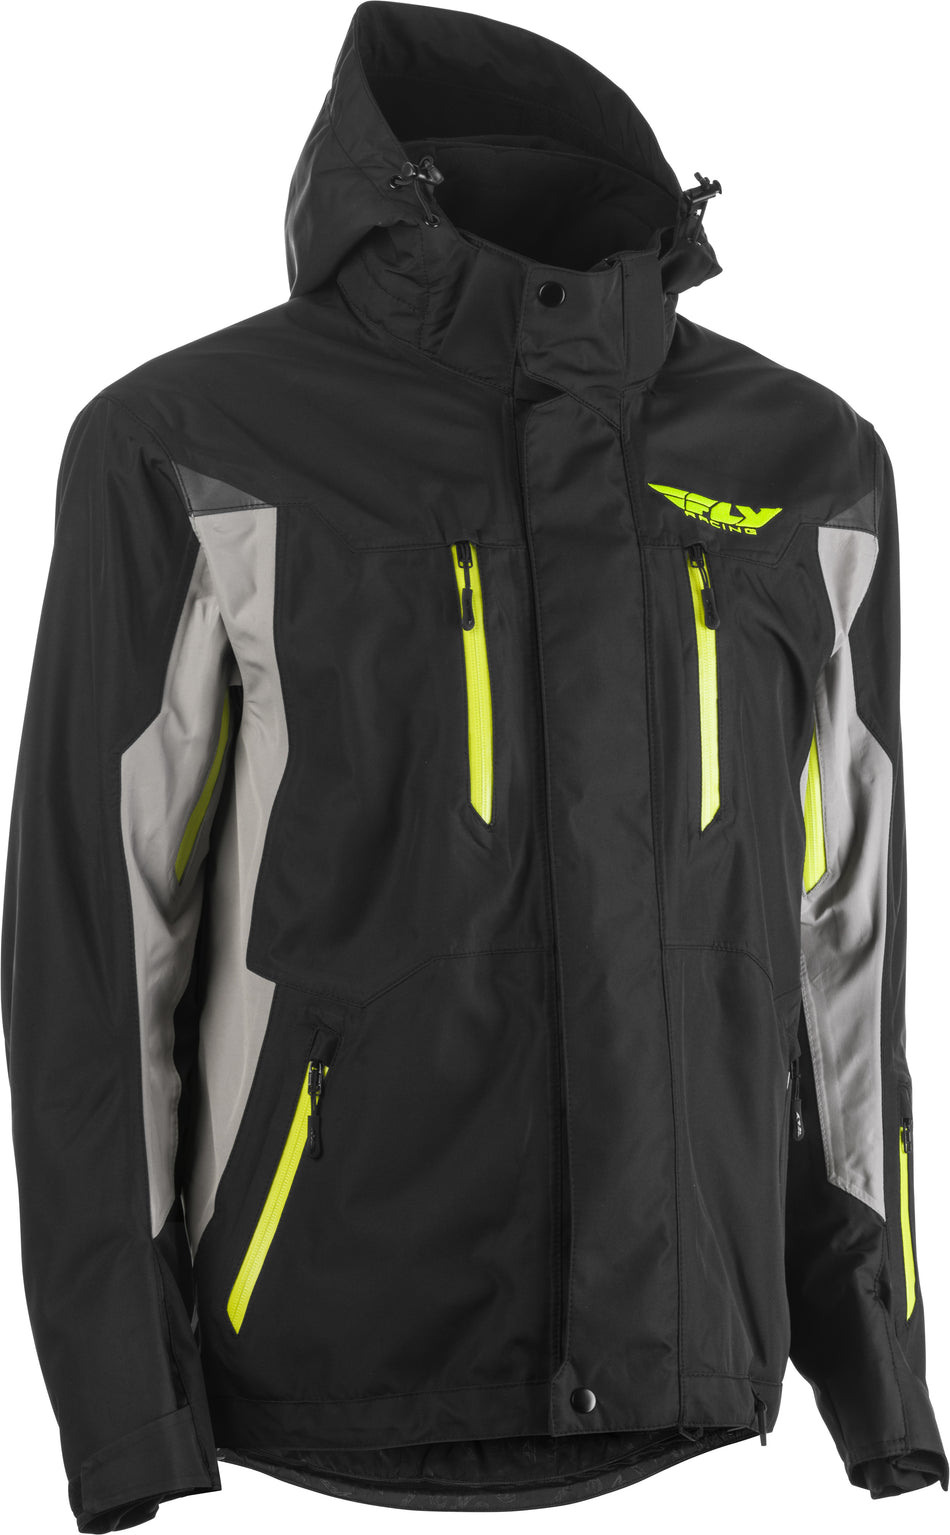 FLY RACING Fly Incline Jacket Grey/Black Sm 470-4102S